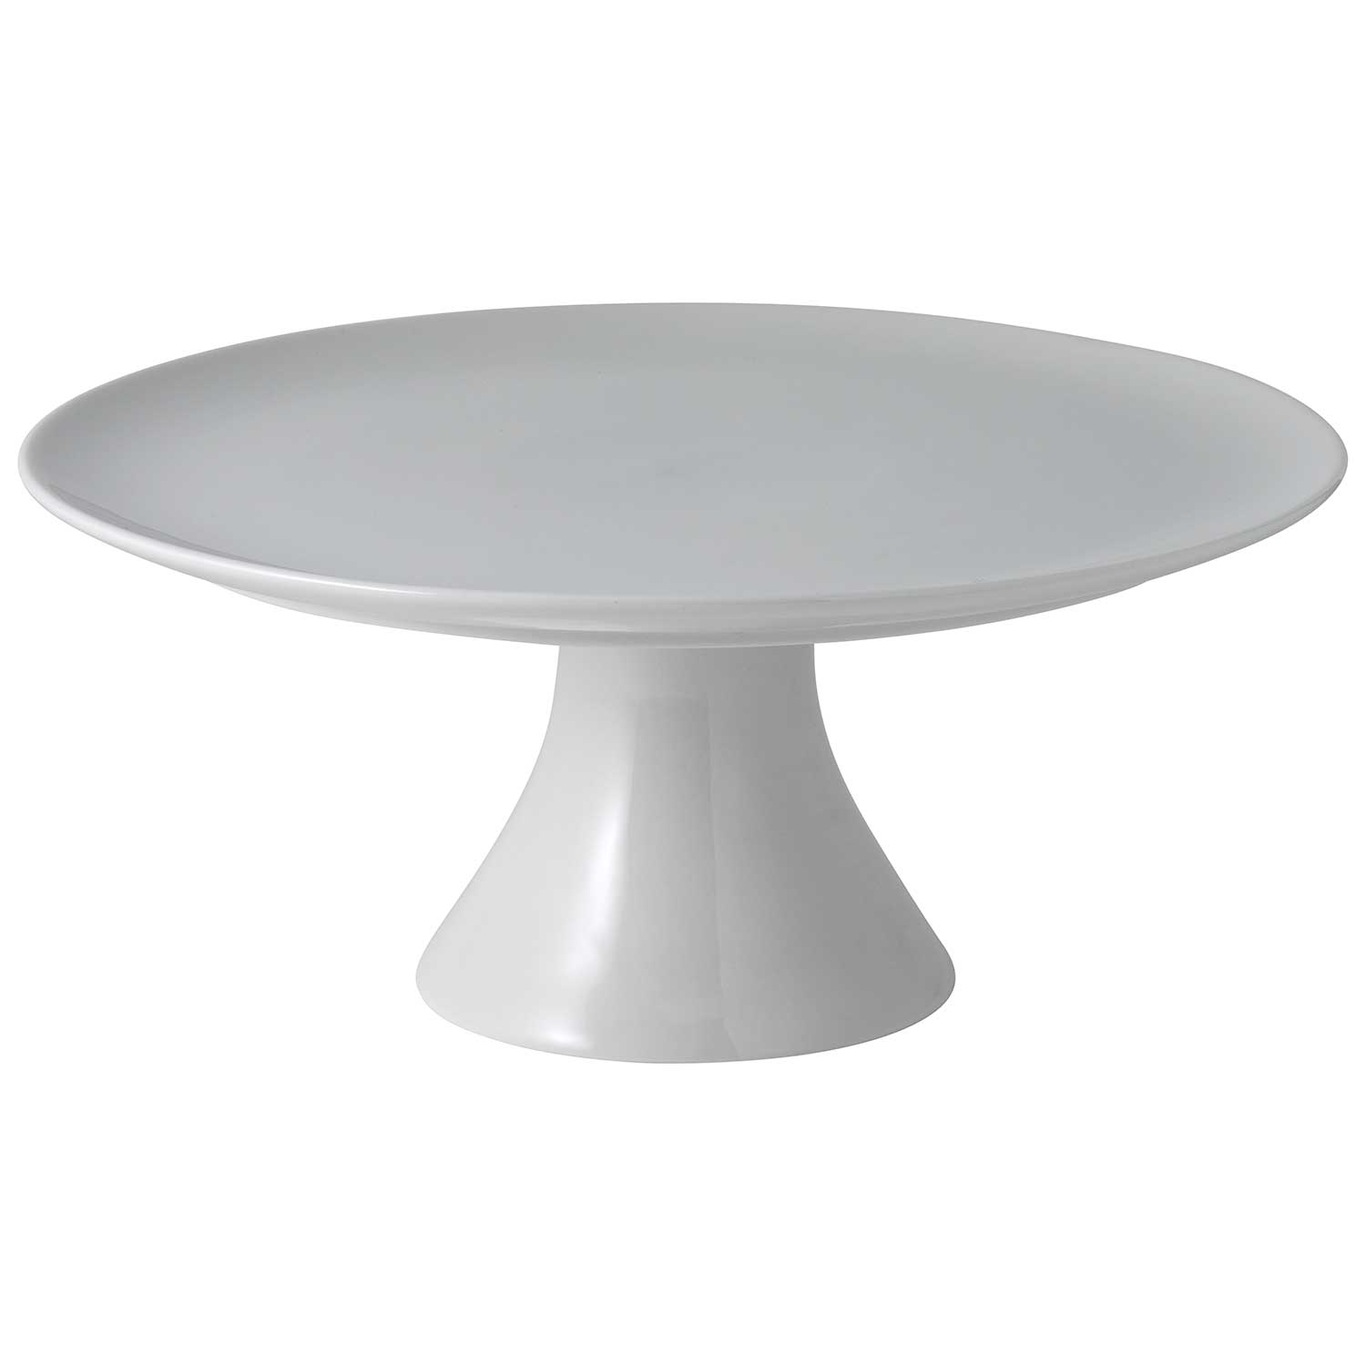 For Me Cake Stand 30 cm